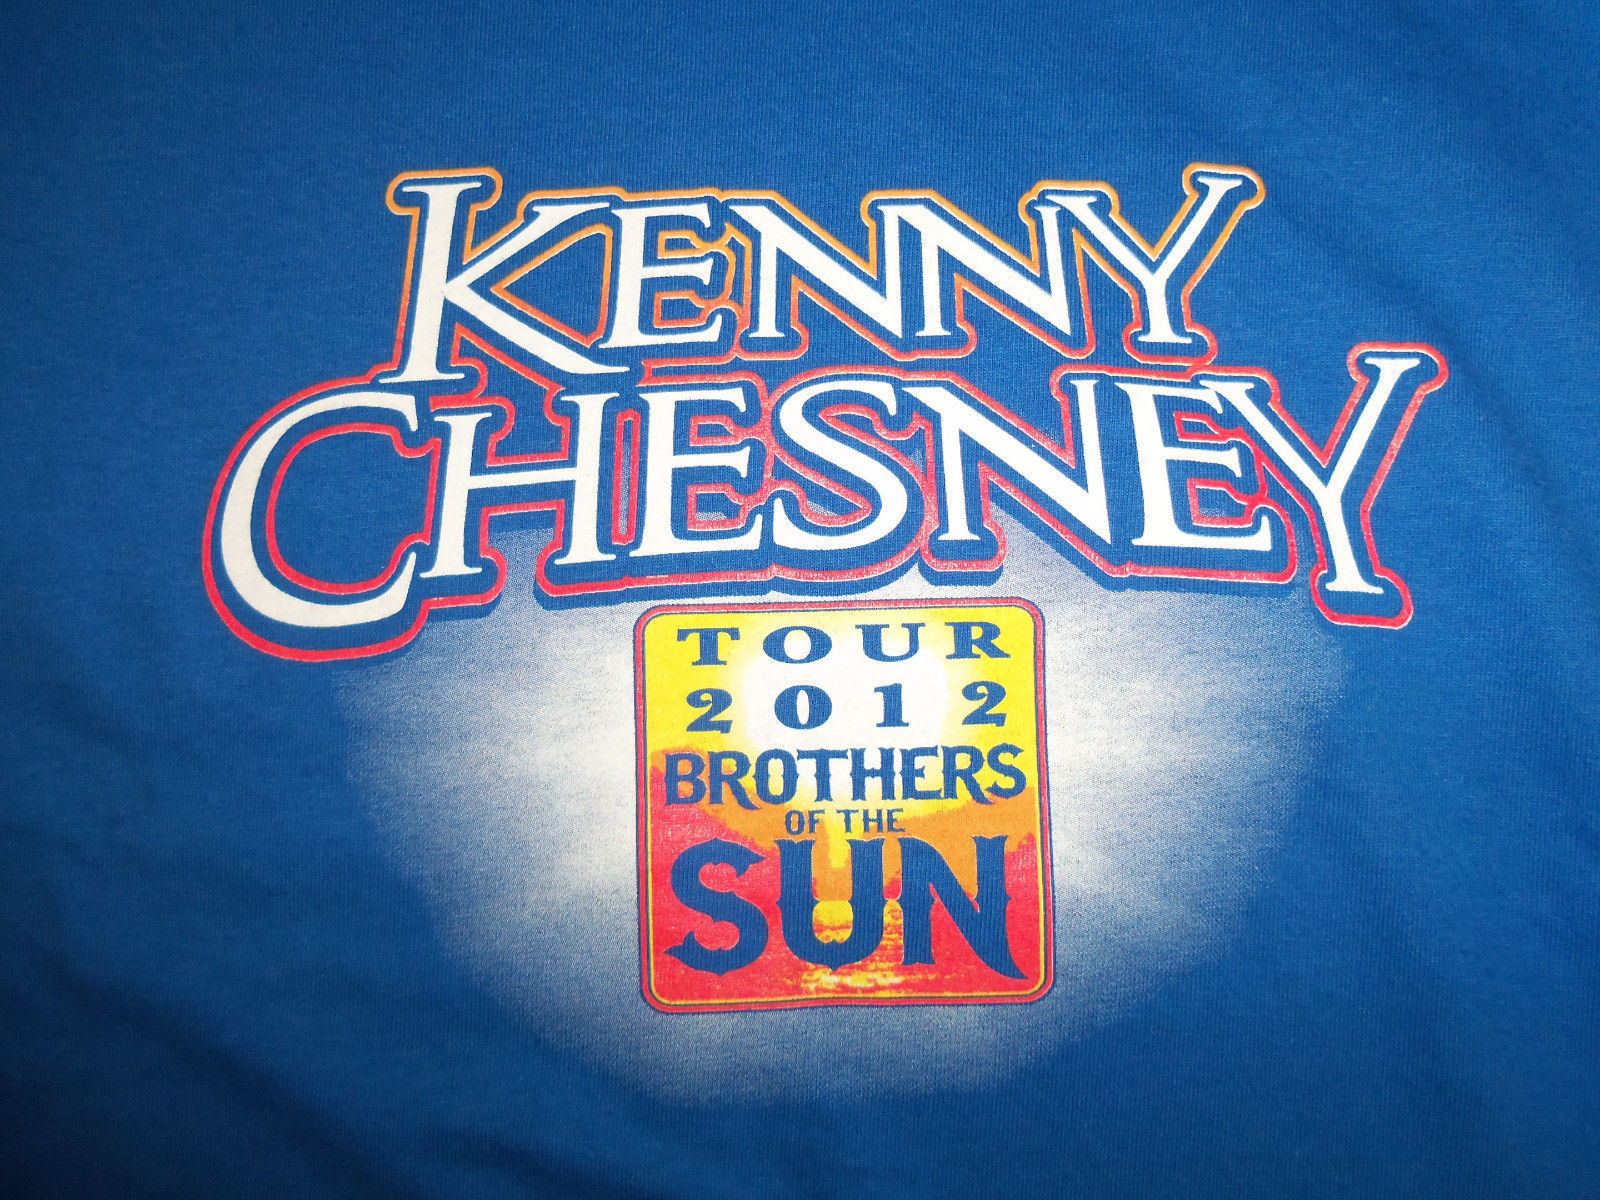 Primary image for Kenny Chesney Brothers Of The Sun Tour 2012 Dates Blue Graphic Print T Shirt - S